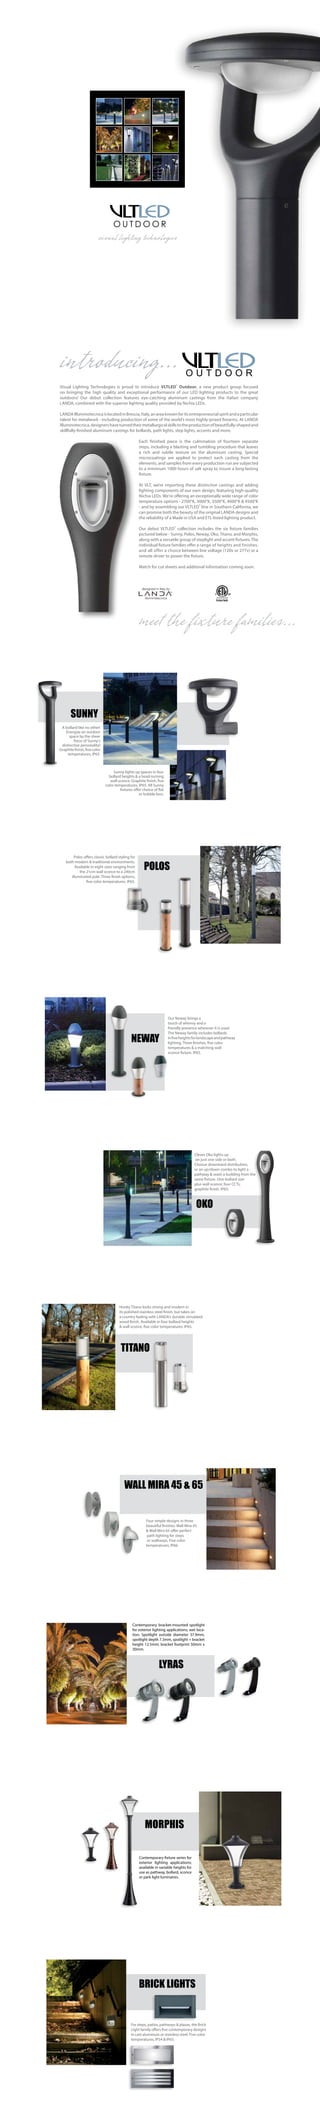 Visual Lighting Technologies is proud to introduce VLTLED® Outdoor, a new product group focused
on bringing the high quality and exceptional performance of our LED lighting products to the great
outdoors! Our debut collection features eye-catching aluminum castings from the Italian company
LANDA, combined with the superior lighting quality provided by Nichia LEDs.
LANDAIlluminotecnicaislocatedinBrescia,Italy,anareaknownforitsentrepreneurialspiritandaparticular
talent for metalwork - including production of some of the world’s most highly-prized firearms. At LANDA
Illuminotecnica,designershaveturnedtheirmetallurgicalskillstotheproductionofbeautifully-shapedand
skillfully-finished aluminum castings for bollards, path lights, step lights, accents and more.
Each finished piece is the culmination of fourteen separate
steps, including a blasting and tumbling procedure that leaves
a rich and subtle texture on the aluminum casting. Special
microcoatings are applied to protect each casting from the
elements, and samples from every production run are subjected
to a minimum 1000 hours of salt spray to insure a long-lasting
fixture.
At VLT, we’re importing these distinctive castings and adding
lighting components of our own design, featuring high-quality
Nichia LEDs. We're offering an exceptionally wide range of color
temperature options - 2700°K, 3000°K, 3500°K, 4000°K & 4500°K
- and by assembling our VLTLED®
line in Southern California, we
can promise both the beauty of the original LANDA designs and
the reliability of a Made in USA and ETL-listed lighting product.
Our debut VLTLED®
collection includes the six fixture families
pictured below - Sunny, Polos, Neway, Oko, Titano, and Morphis,
along with a versatile group of steplight and accent fixtures. The
individual fixture families offer a range of heights and finishes,
and all offer a choice between line voltage (120v or 277v) or a
remote driver to power the fixture.
Watch for cut sheets and additonal information coming soon.
illuminotecnica
designed in Italy by
®
introducing...
meet the fixture families...
VLTLED
O U T D O O R
visual lighting technologies
Contemporary fixture series for
exterior lighting applications;
available in variable heights for
use as pathway, bollard, sconce
or park light luminaires.
MORPHIS
Polos offers classic bollard styling for
both modern & traditional environments.
Available in eight sizes ranging from
the 21cm wall sconce to a 240cm
illuminated pole. Three finish options,
five color temperatures. IP65.
POLOS
Clever Oko lights up
on just one side or both.
Choose downward distribution,
or an up/down combo to light a
pathway & wash a building from the
same fixture. One bollard size
plus wall sconce; four CCTs,
graphite finish. IP65.
OKO
Hunky Titano looks strong and modern in
its polished stainless steel finish, but takes on
a country feeling with LANDA's durable simulated
wood finish. Available in four bollard heights
& wall sconce, five color temperatures. IP65.
TITANO
Our Neway brings a
touch of whimsy and a
friendly presence wherever it is used.
The Neway family includes bollards
infiveheightsforlandscapeandpathway
lighting. Three finishes, five color
temperatures & a matching wall
sconce fixture. IP65.
NEWAY
LYRAS
Contemporary bracket-mounted spotlight
for exterior lighting applications; wet loca-
tion. Spotlight outside diameter 37.9mm,
spotlight depth 7.3mm, spotlight + bracket
height 12.5mm; bracket footprint 50mm x
30mm.
Four simple designs in three
beautiful finishes. Wall Mira 45
& Wall Mira 65 offer perfect
path lighting for steps
or walkways. Five color
temperatures, IP66.
WALL MIRA 45 & 65
For steps, patios, pathways & plazas, the Brick
Light family offers five contemporary designs
in cast aluminum or stainless steel. Five color
temperatures, IP54 & IP65.
BRICK LIGHTS
Sunny lights up spaces in four
bollard heights & a head-turning
wall sconce. Graphite finish, five
color temperatures, IP65. All Sunny
fixtures offer choice of flat
or bubble lens.
A bollard like no other!
Energize an outdoor
space by the sheer
force of Sunny's
distinctive personality!
Graphitefinish,fivecolor
temperatures, IP65.
SUNNY
VLTLEDO U T D O O R
 